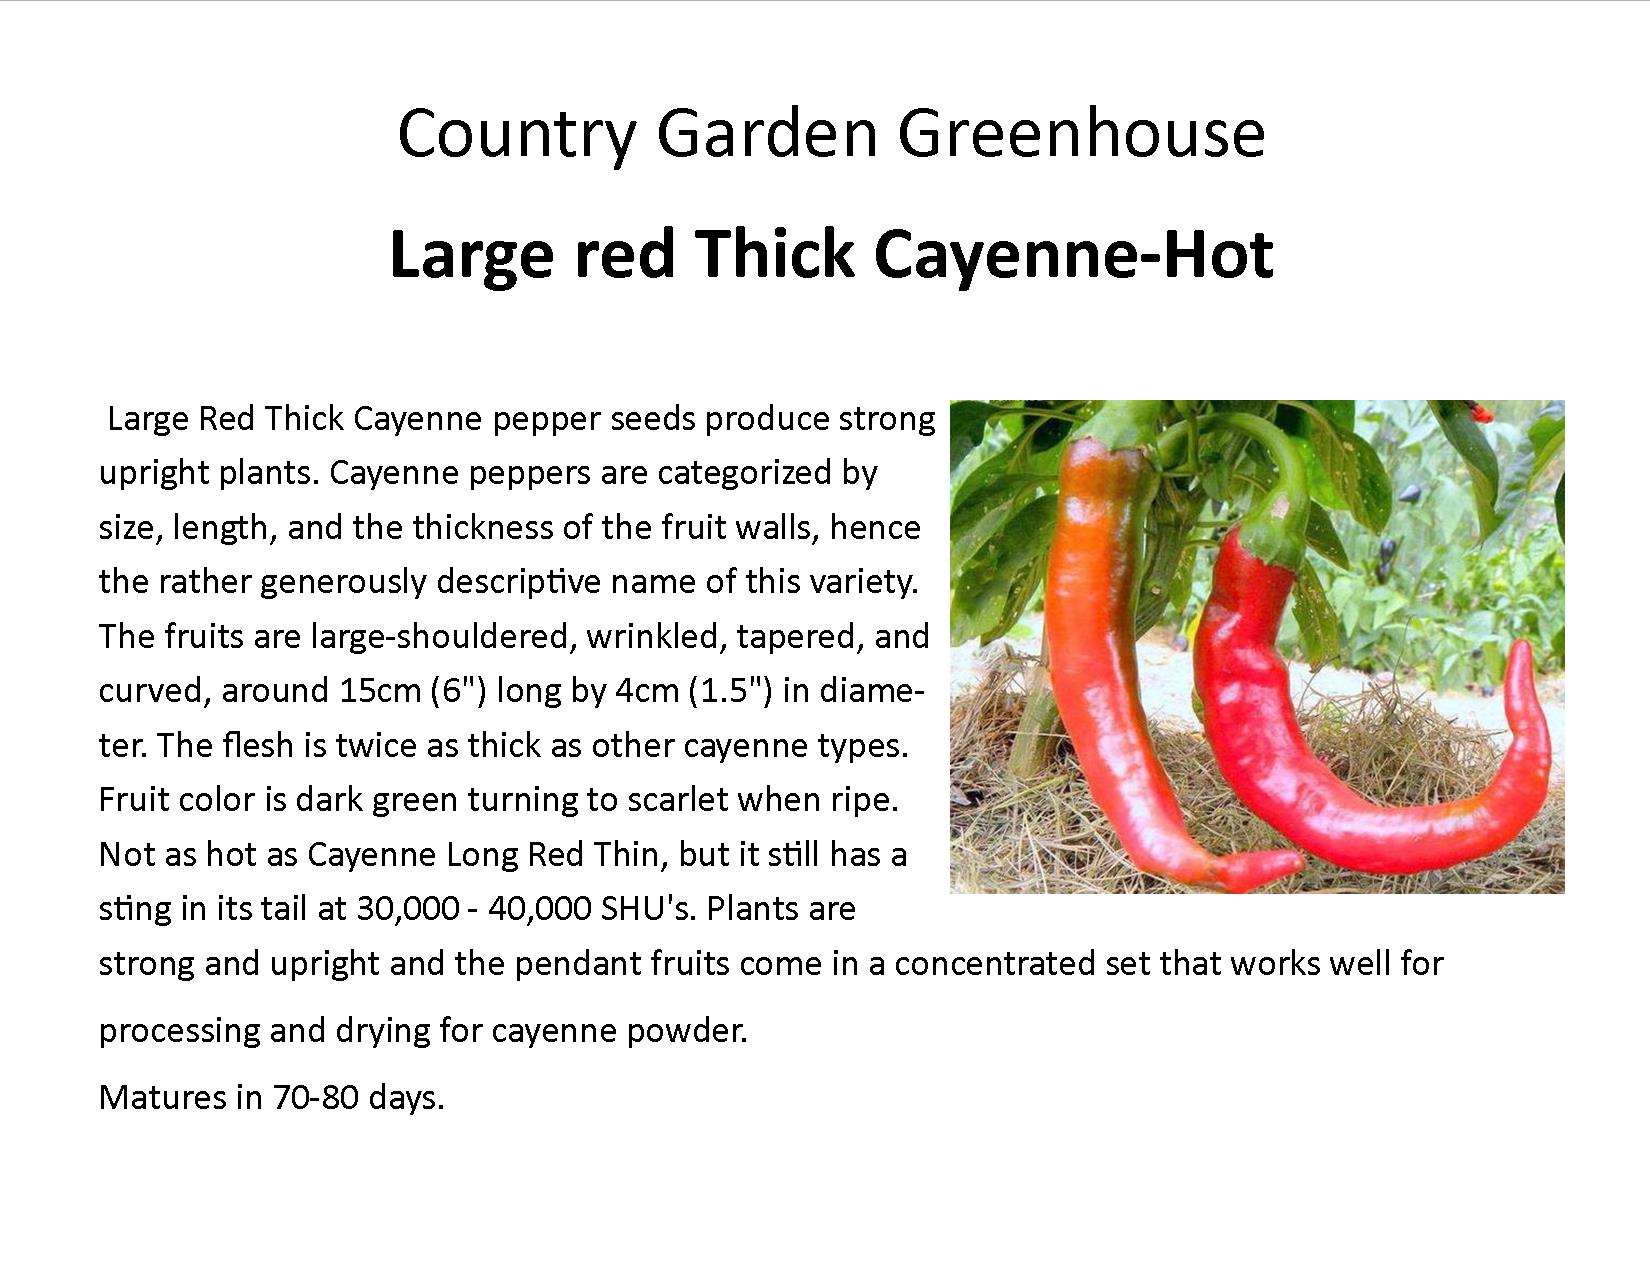 Large red Thick Cayenne-Hot